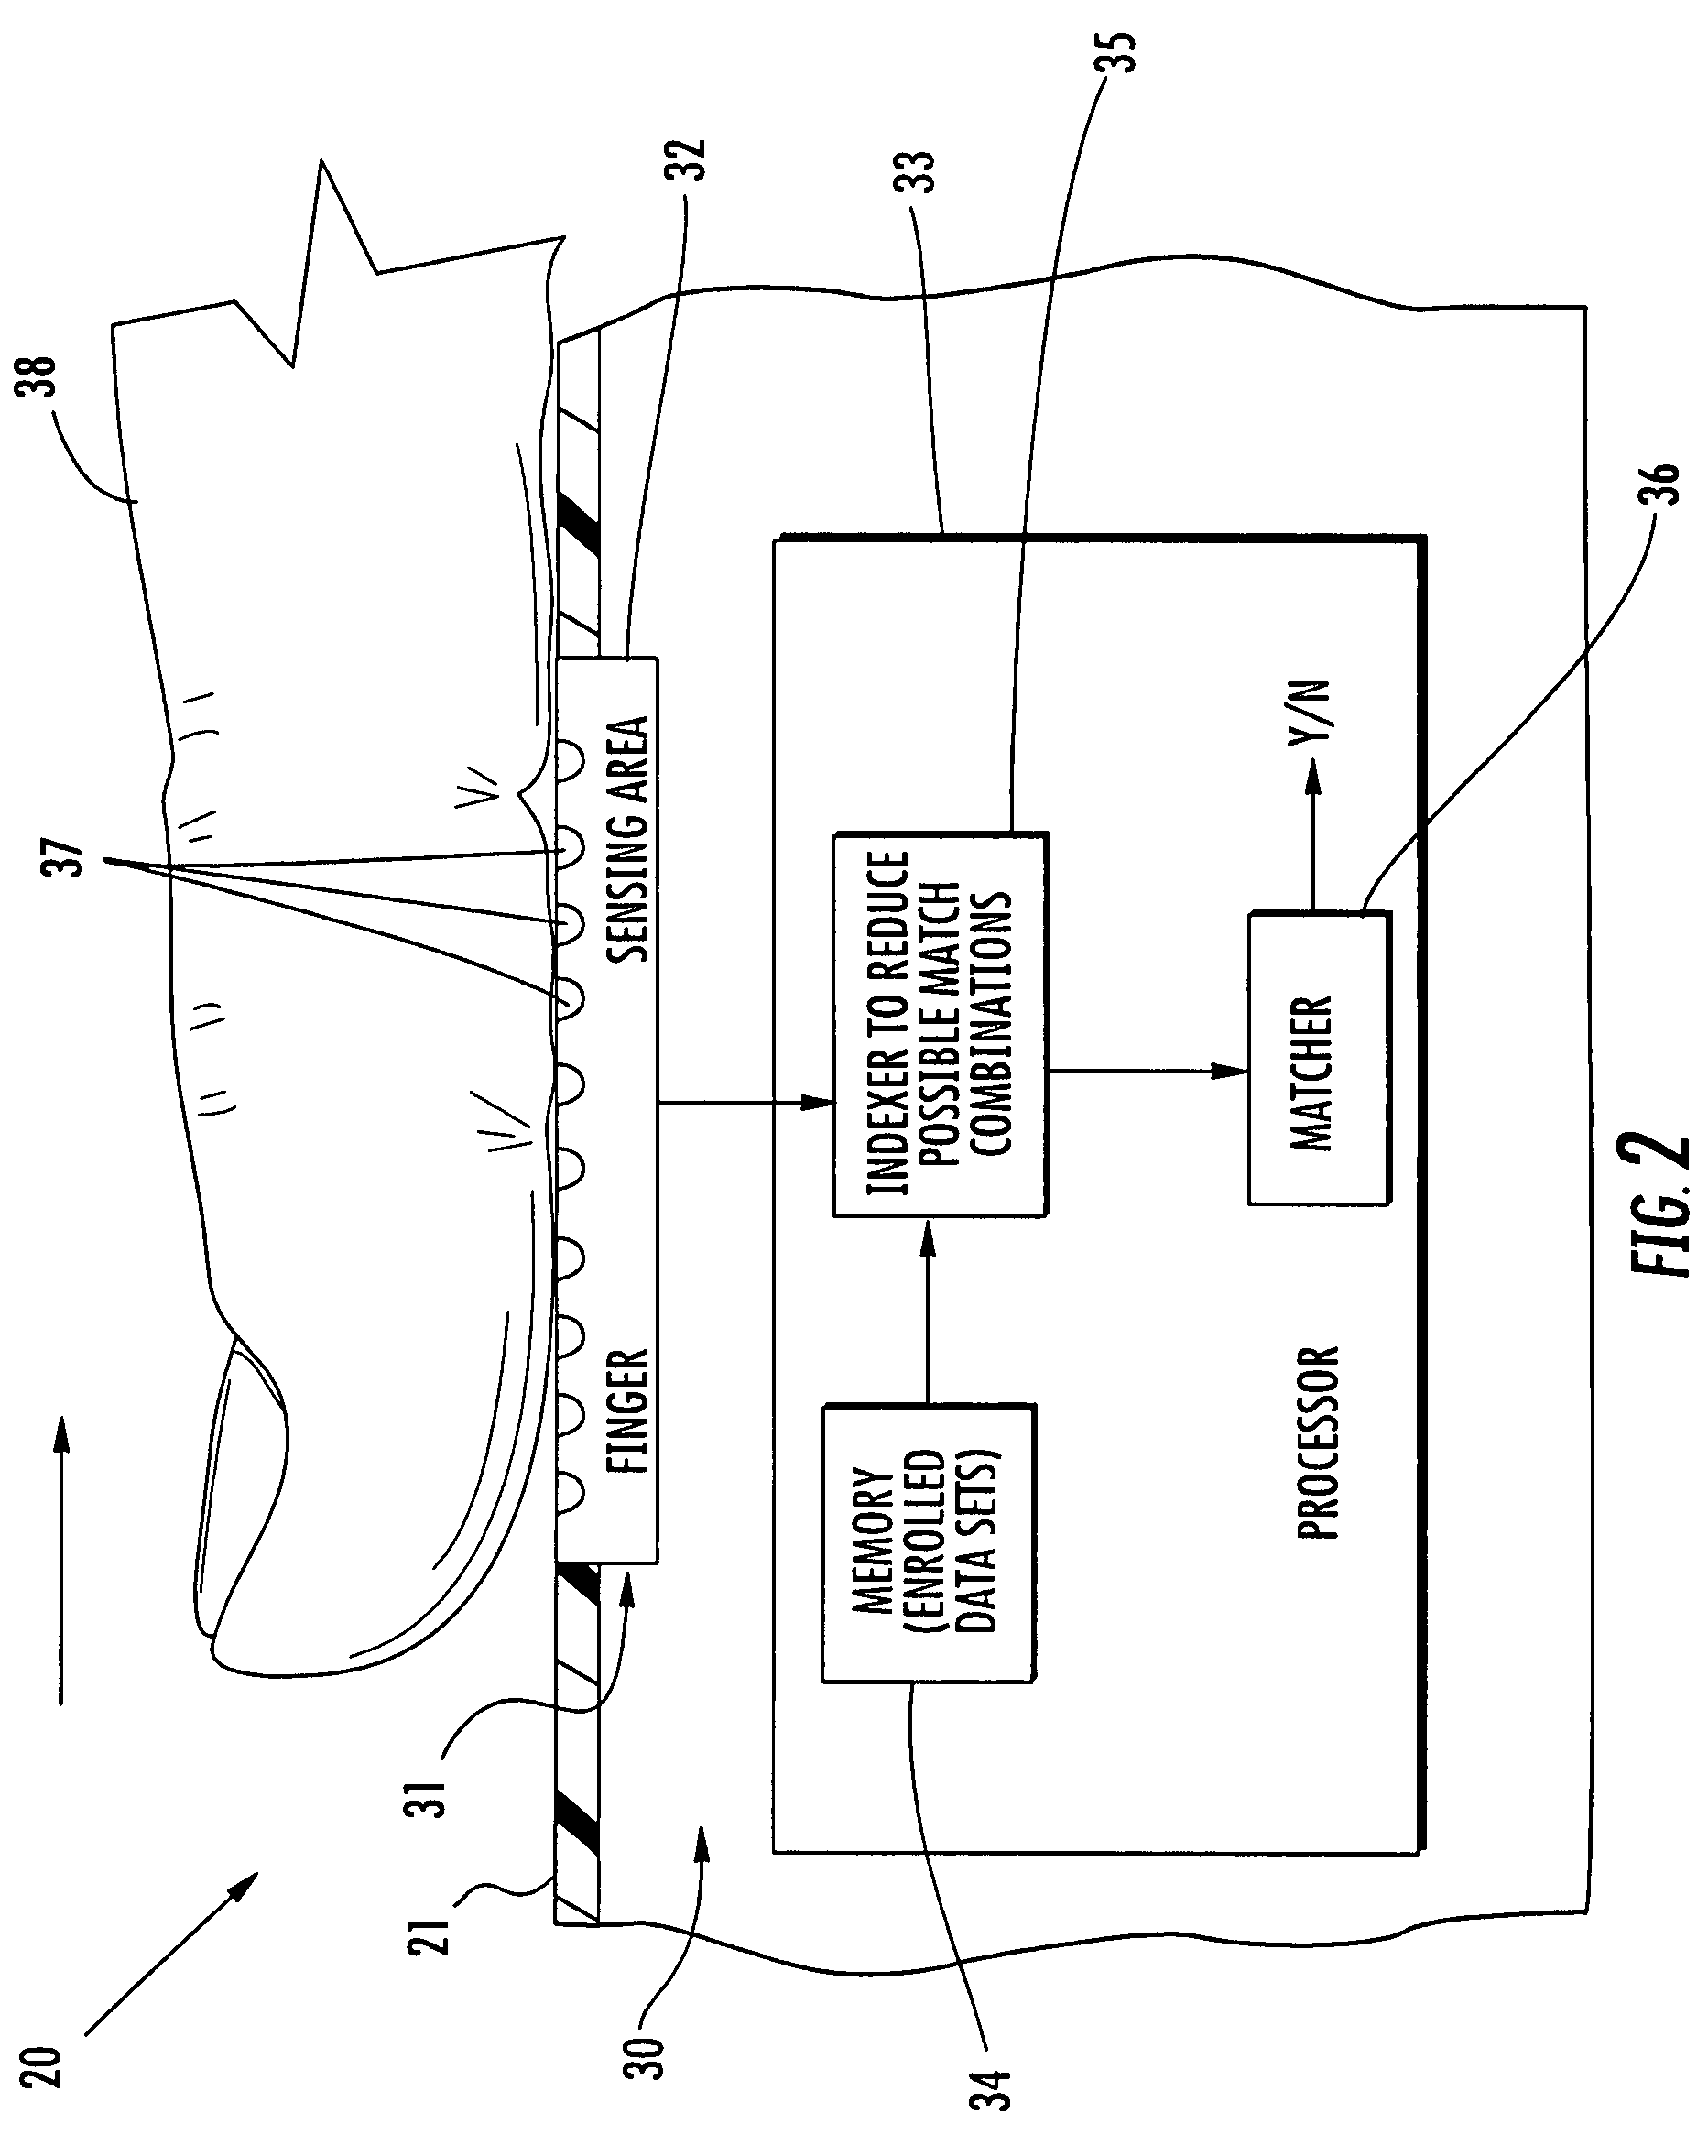 Finger sensing device using indexing and associated methods